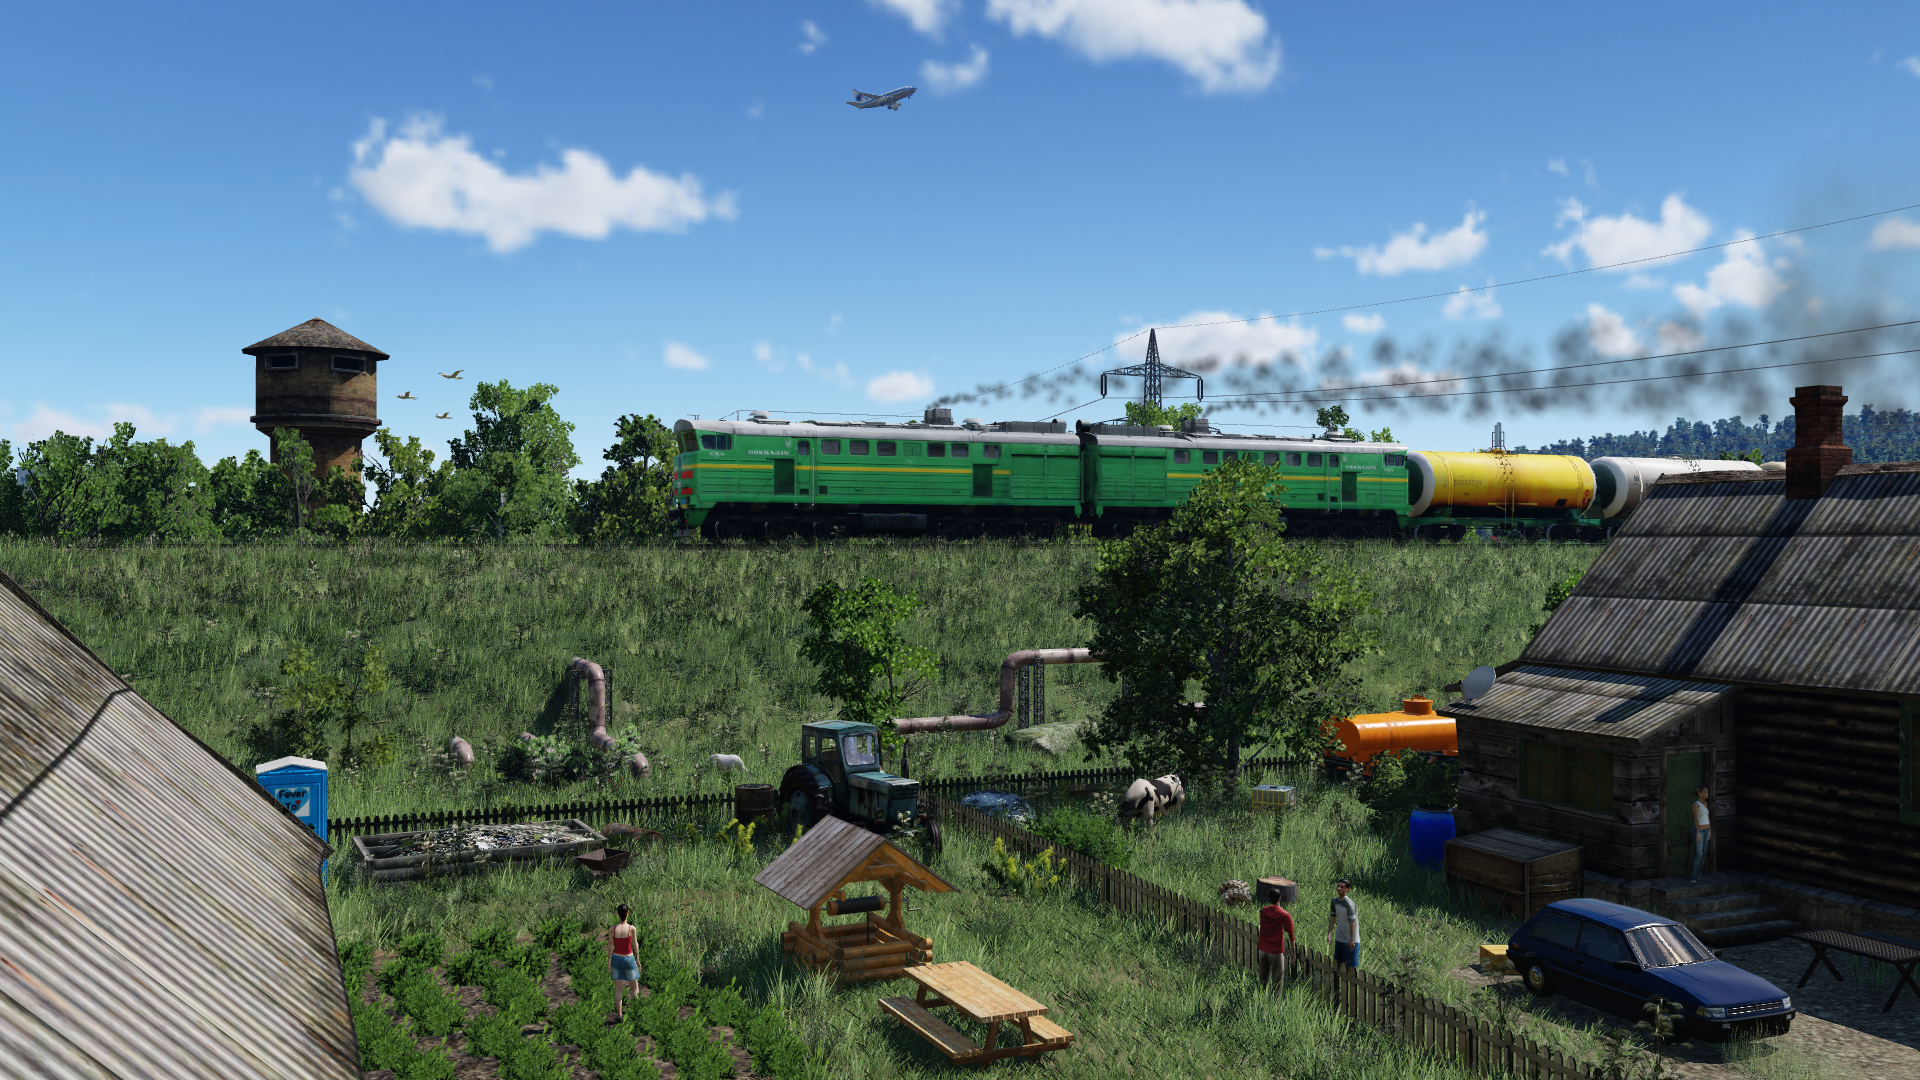 [TpF1] Cargo train in the countryside